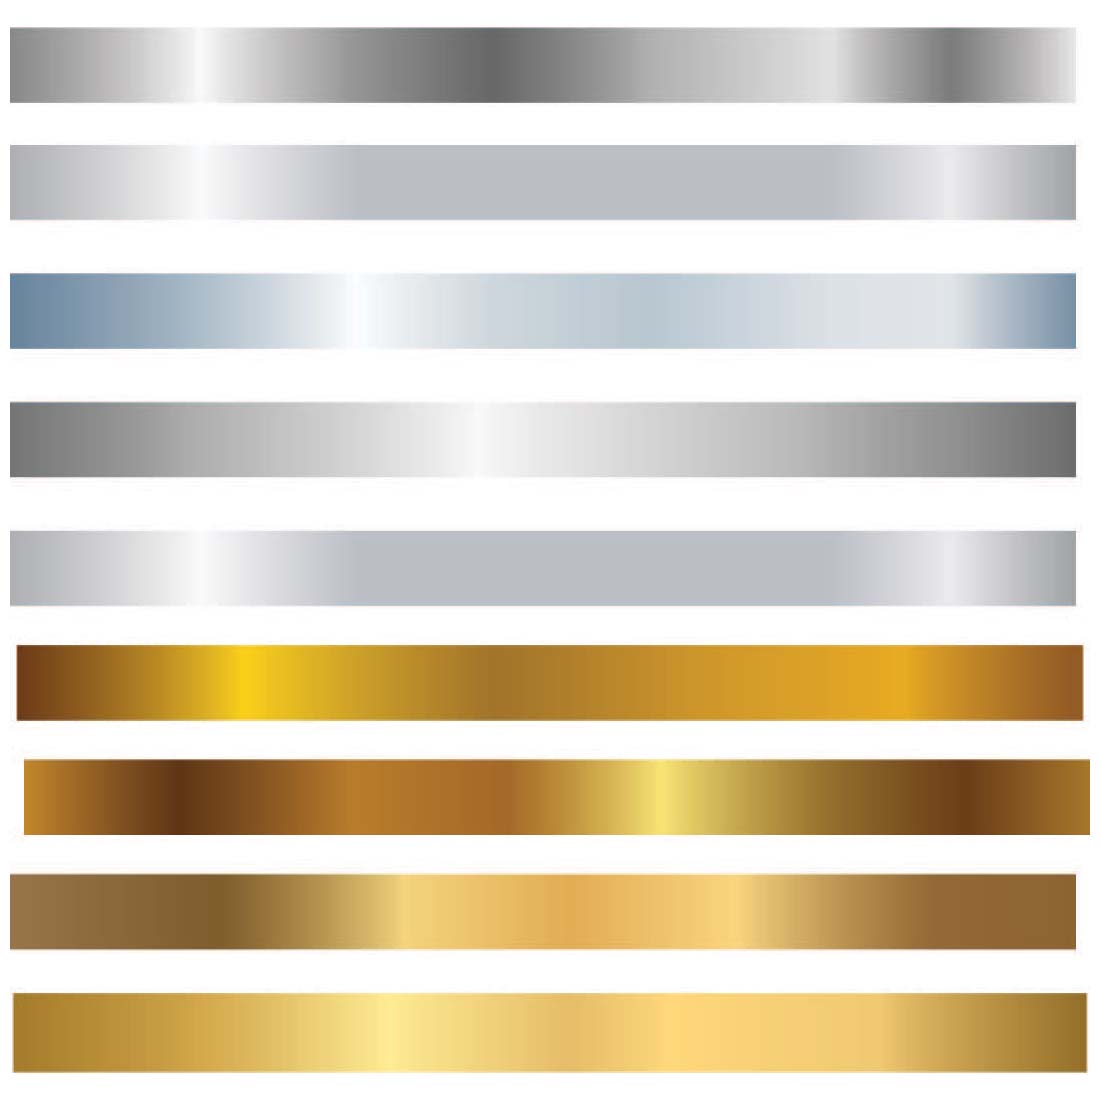 5 Silver and 4 Gold Gradients cover image.